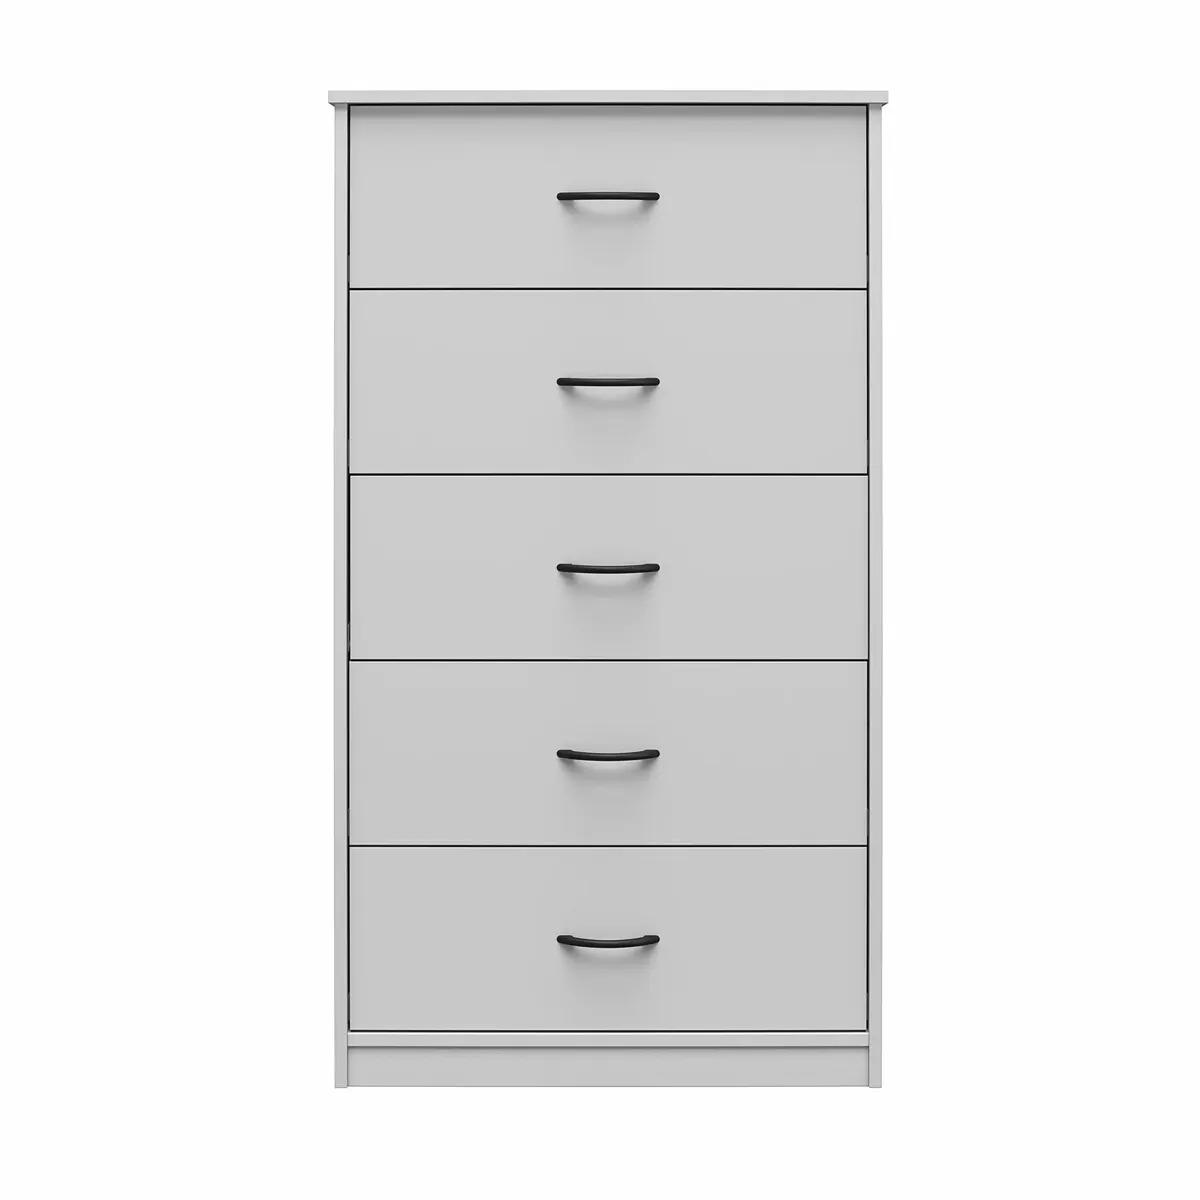 Mainstays Classic 5 Drawer Dresser for $44 Shipped